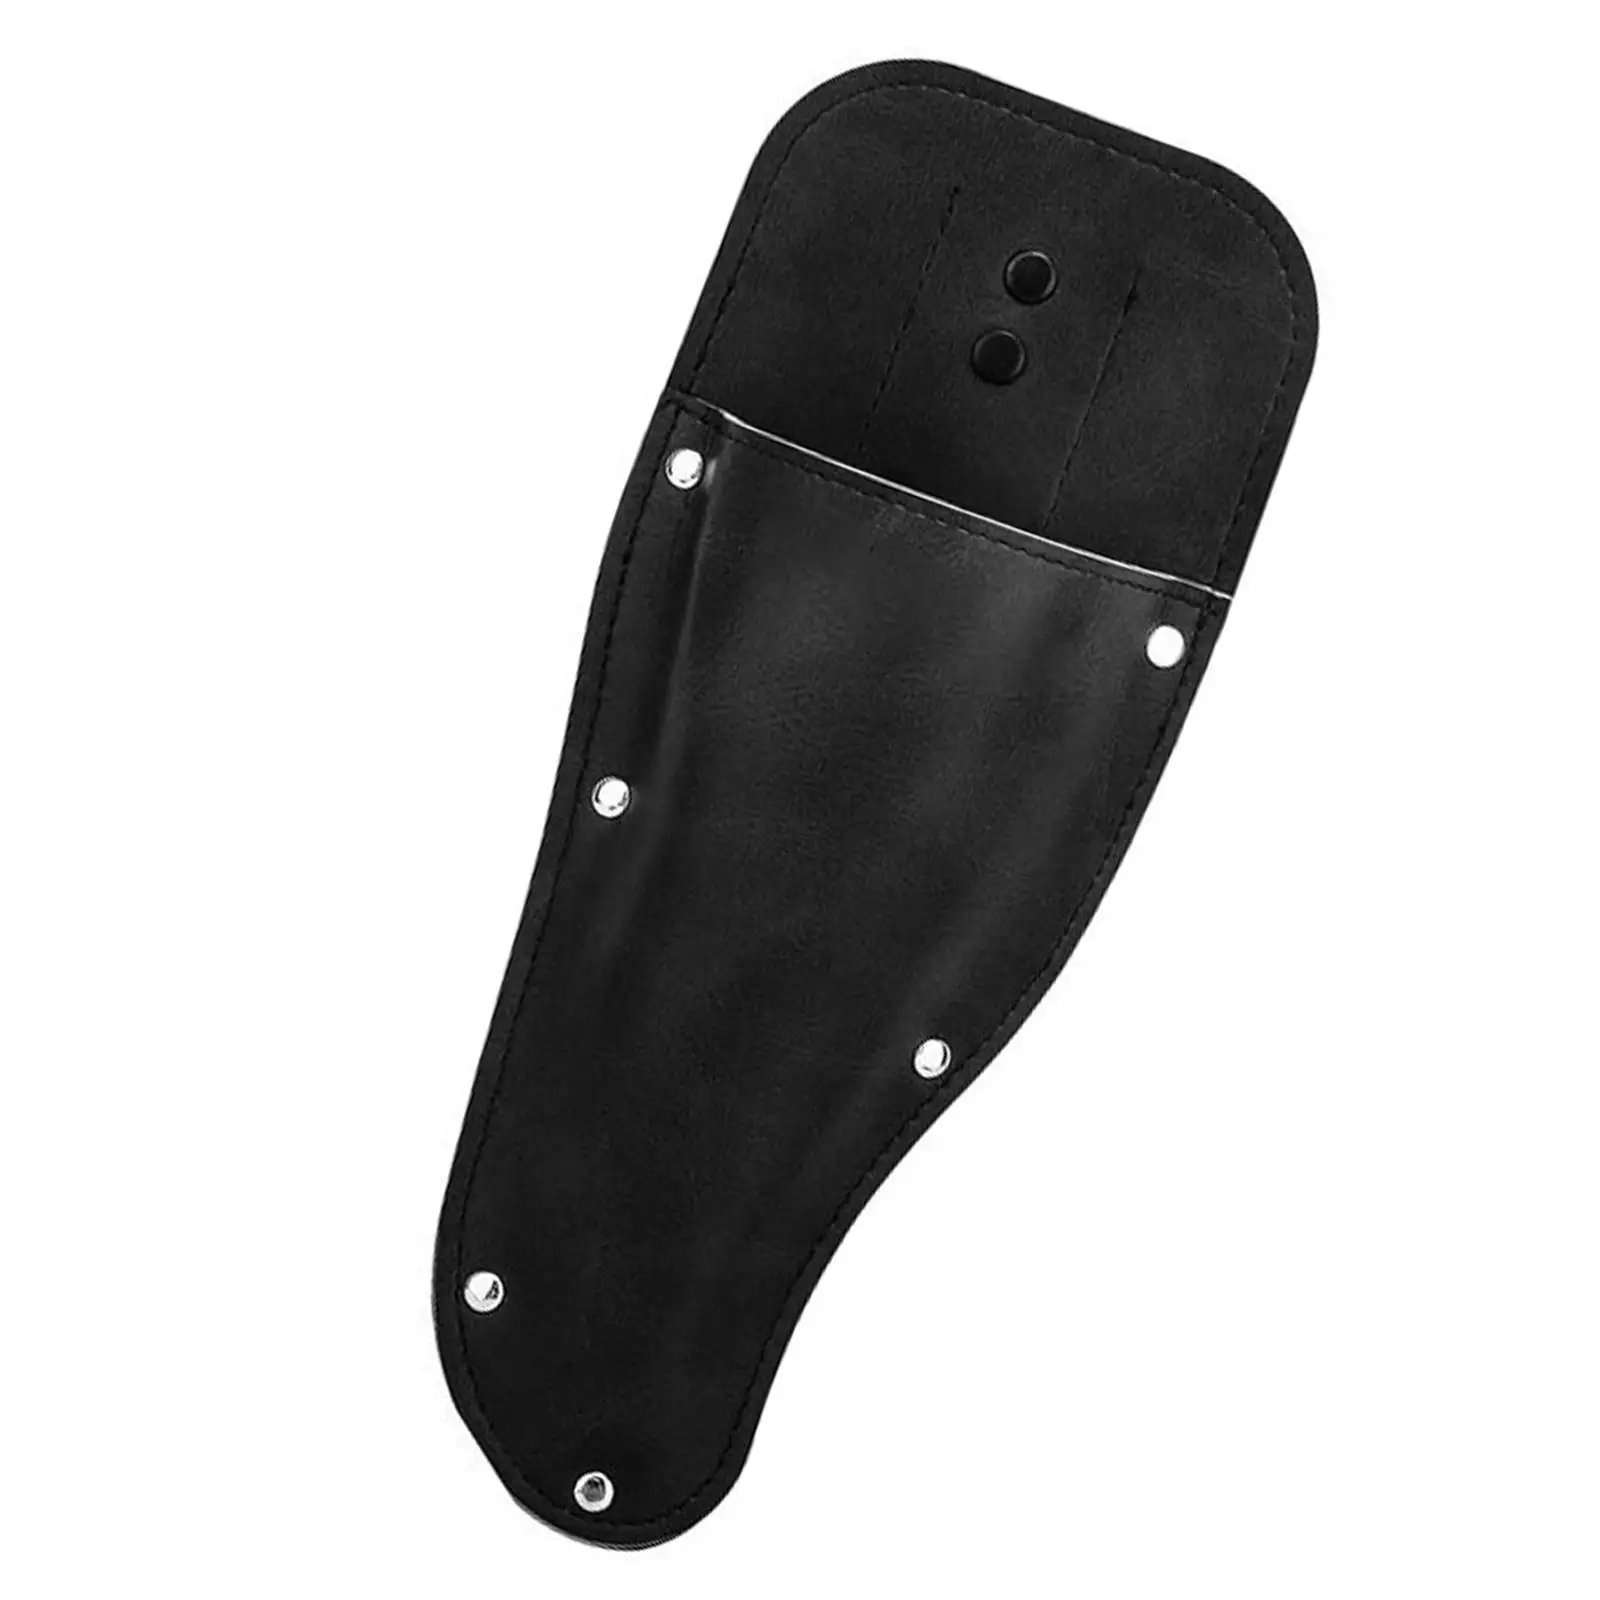 PU Leather Sheath Pouch Holder Scabbard Cover Hanging Bag Tool Pouch Protective Case for Garden Pruning